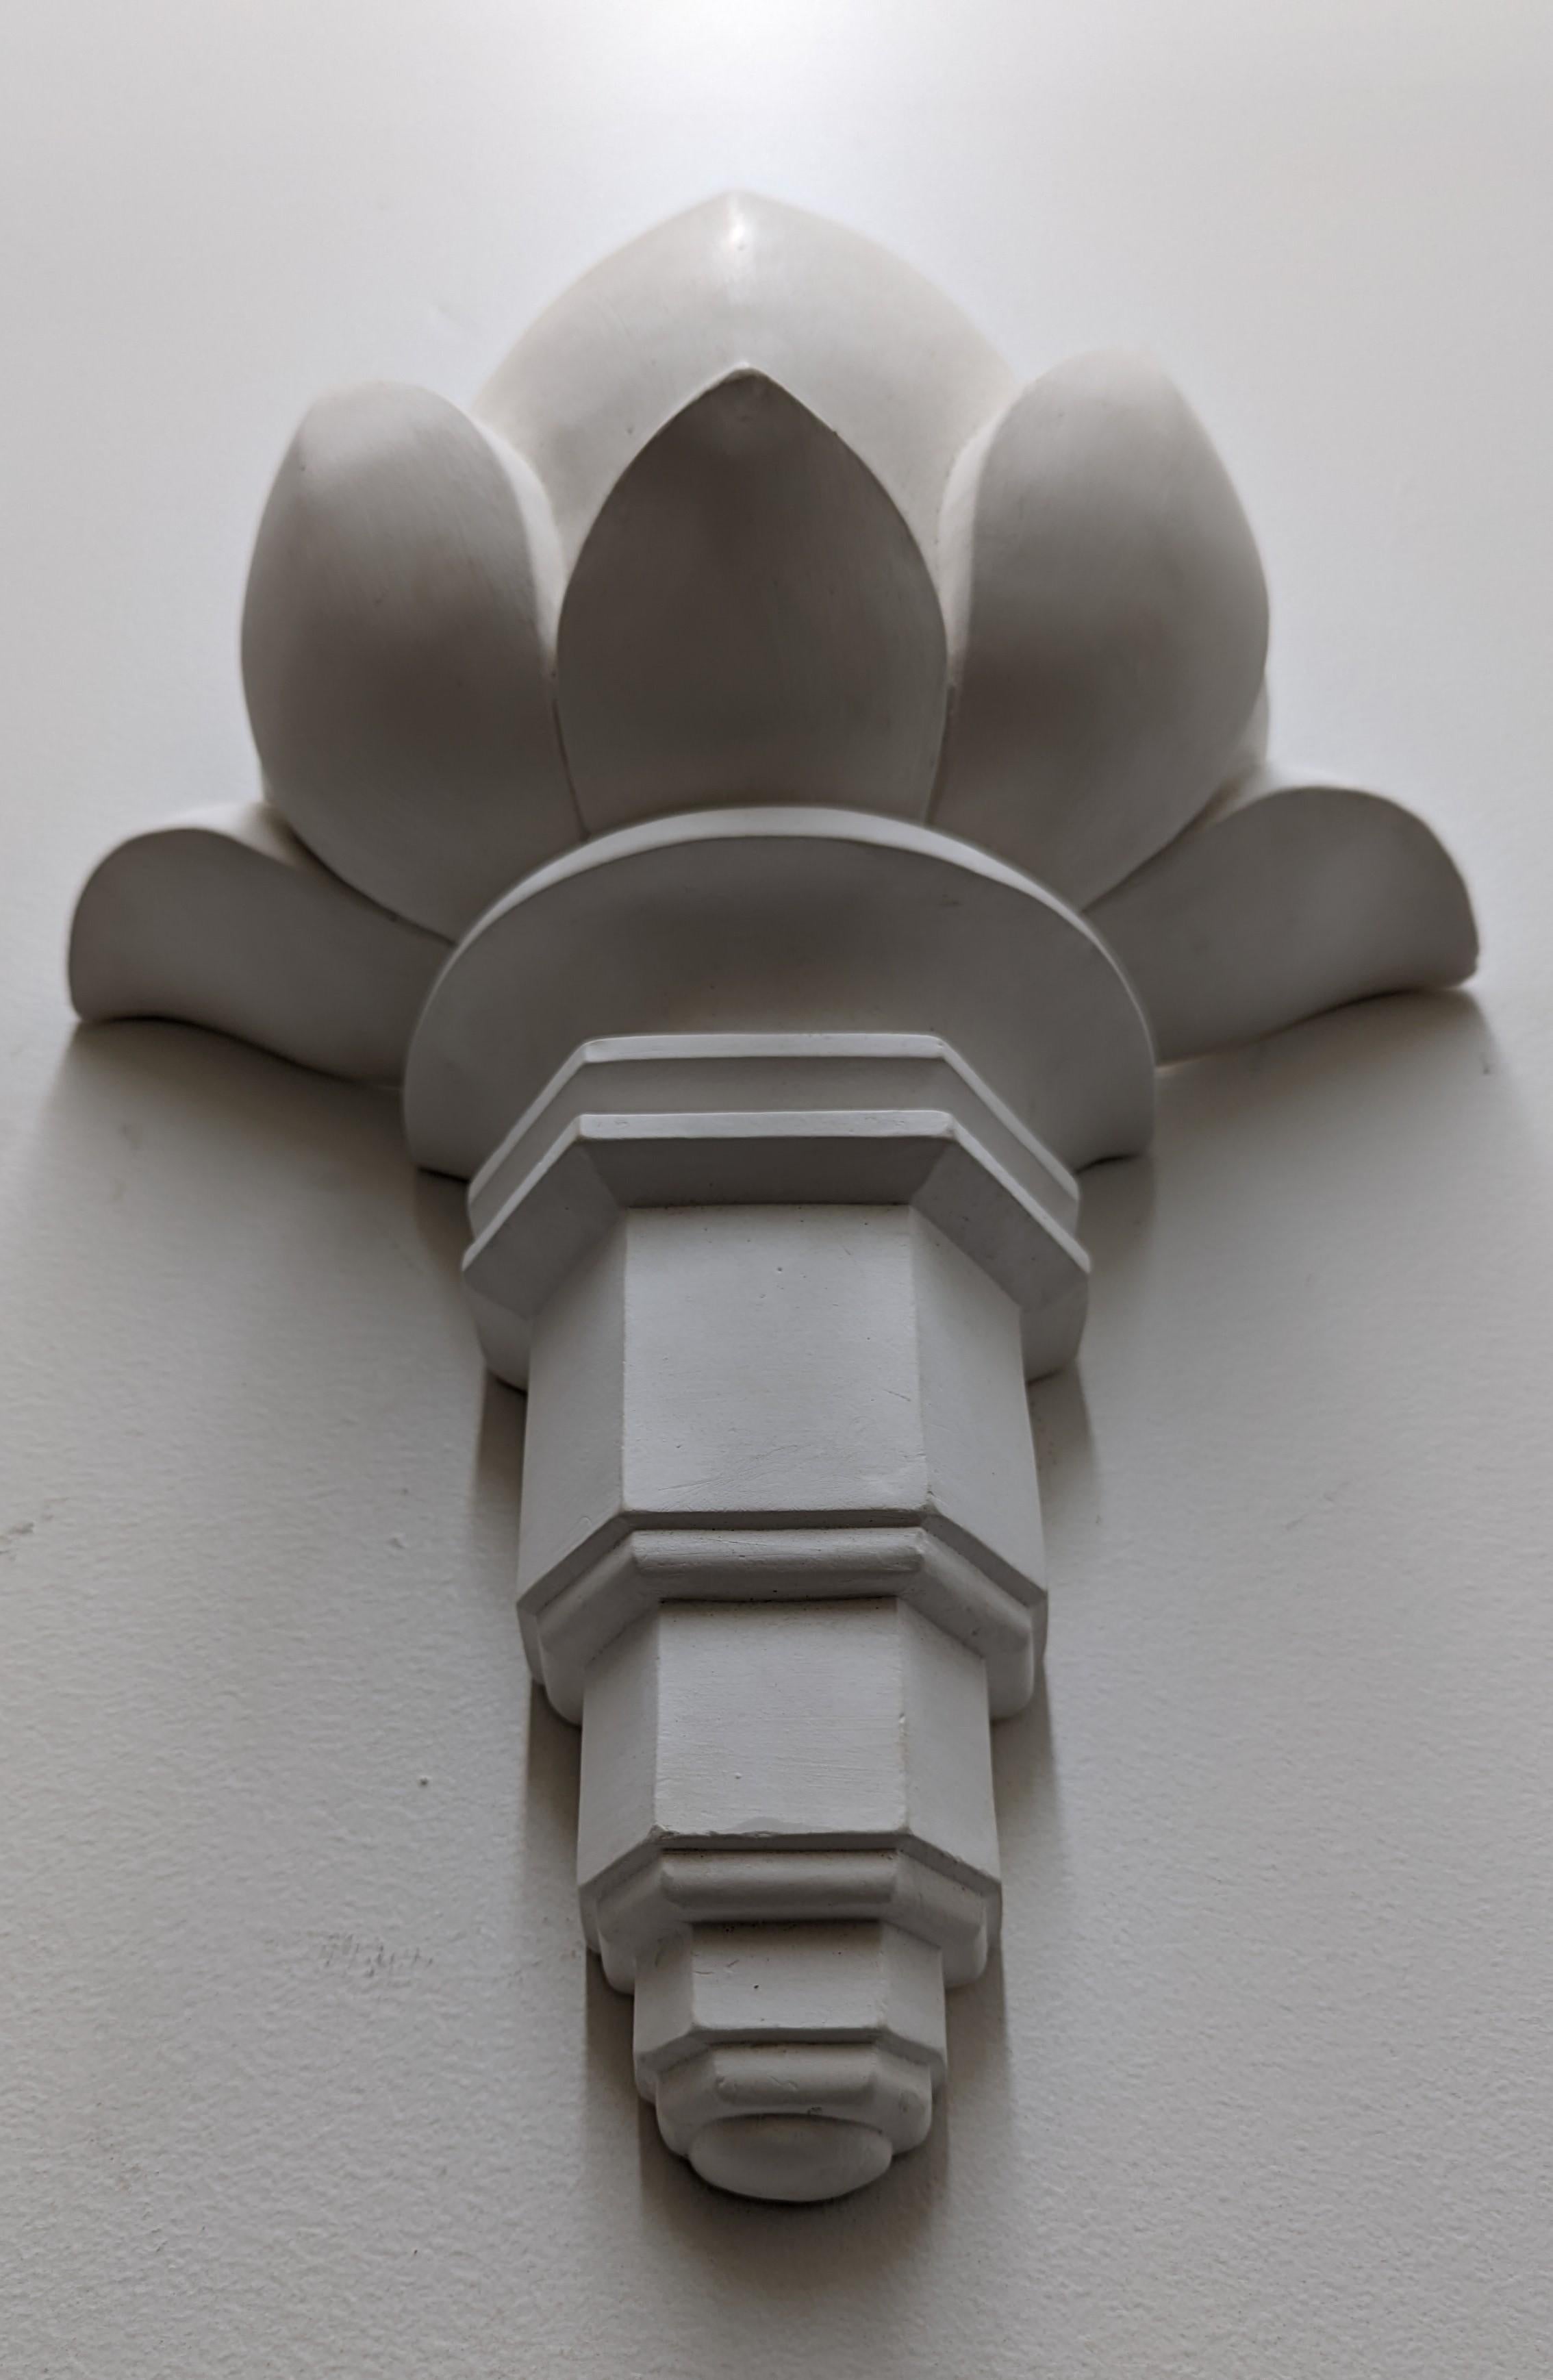 A pair of elegant French Art Deco hand carved plaster wall sconces contemporary design by Bourgeois Boheme Atelier in the shape of a torch. Each sconce uses a candelabra based bulb, Max wattage 60 each. Dimensions: 16